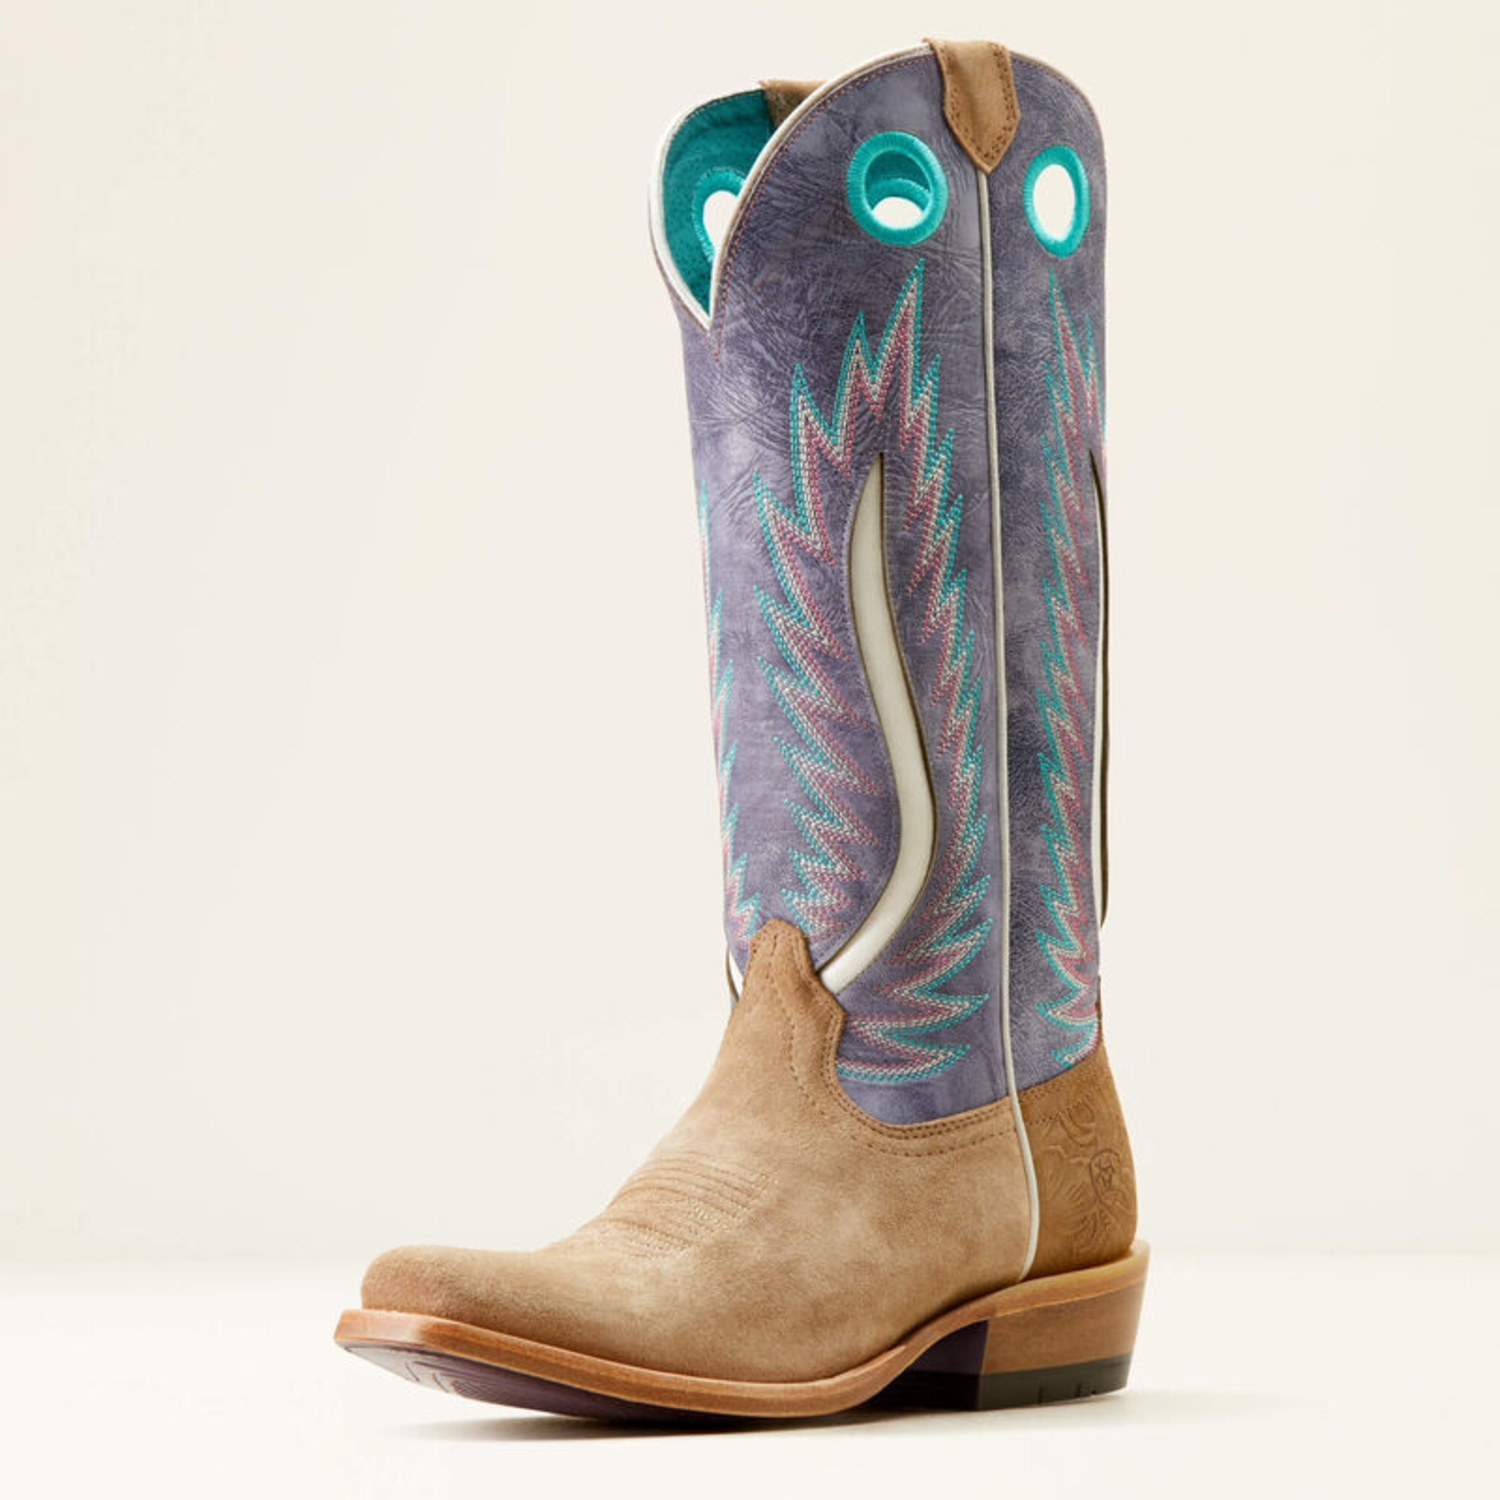 Ariat Boots - Frontier Western Store